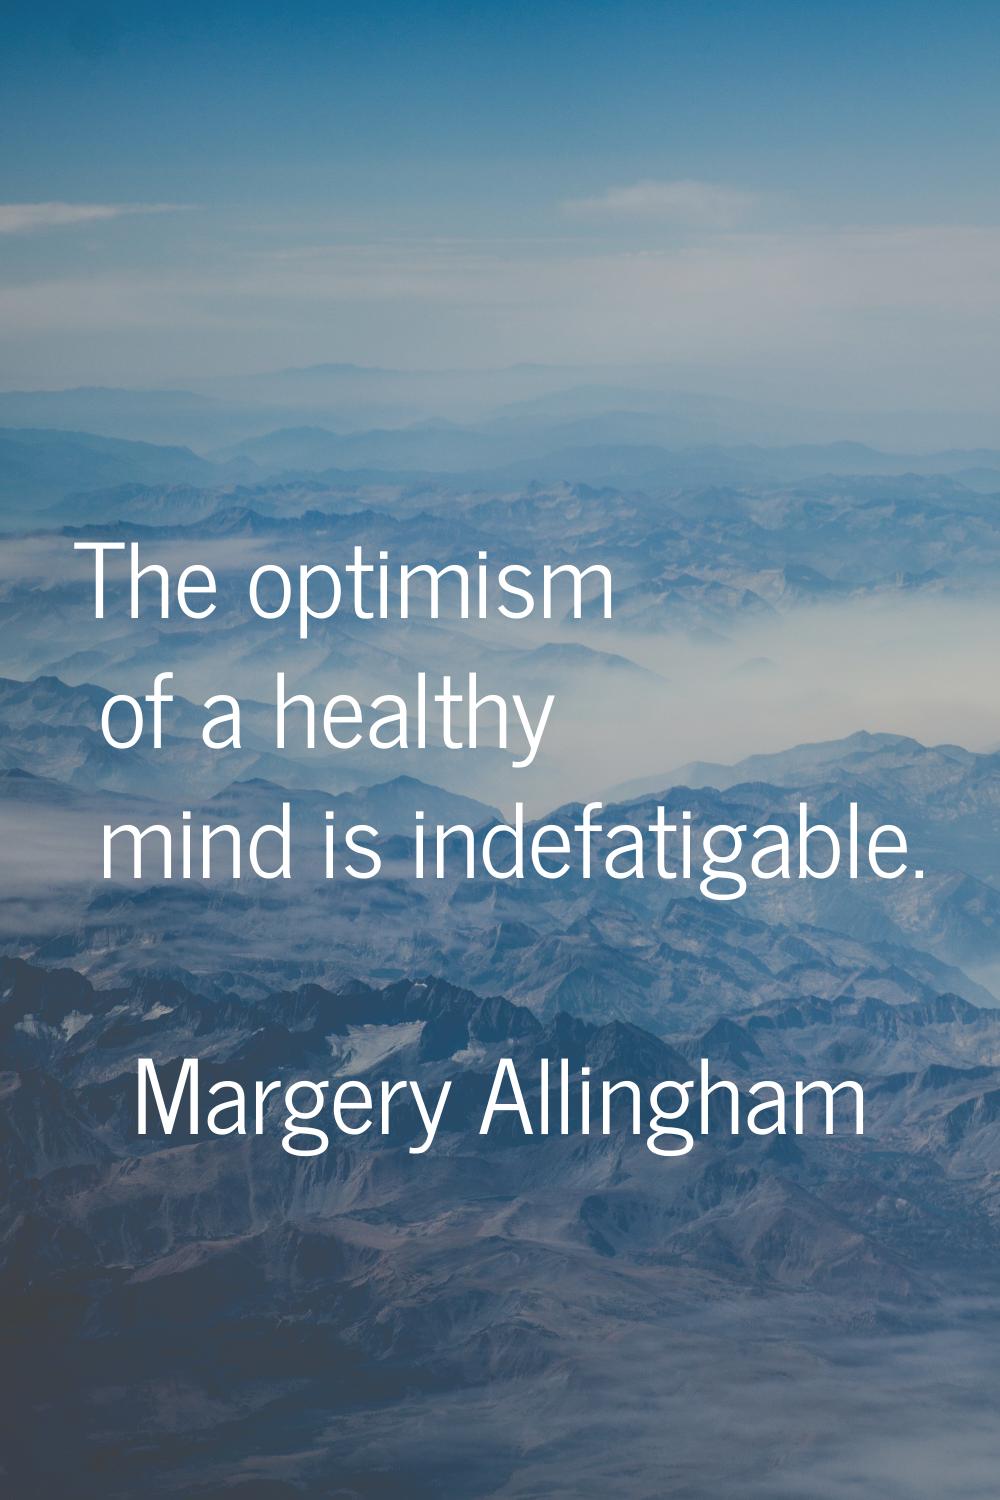 The optimism of a healthy mind is indefatigable.